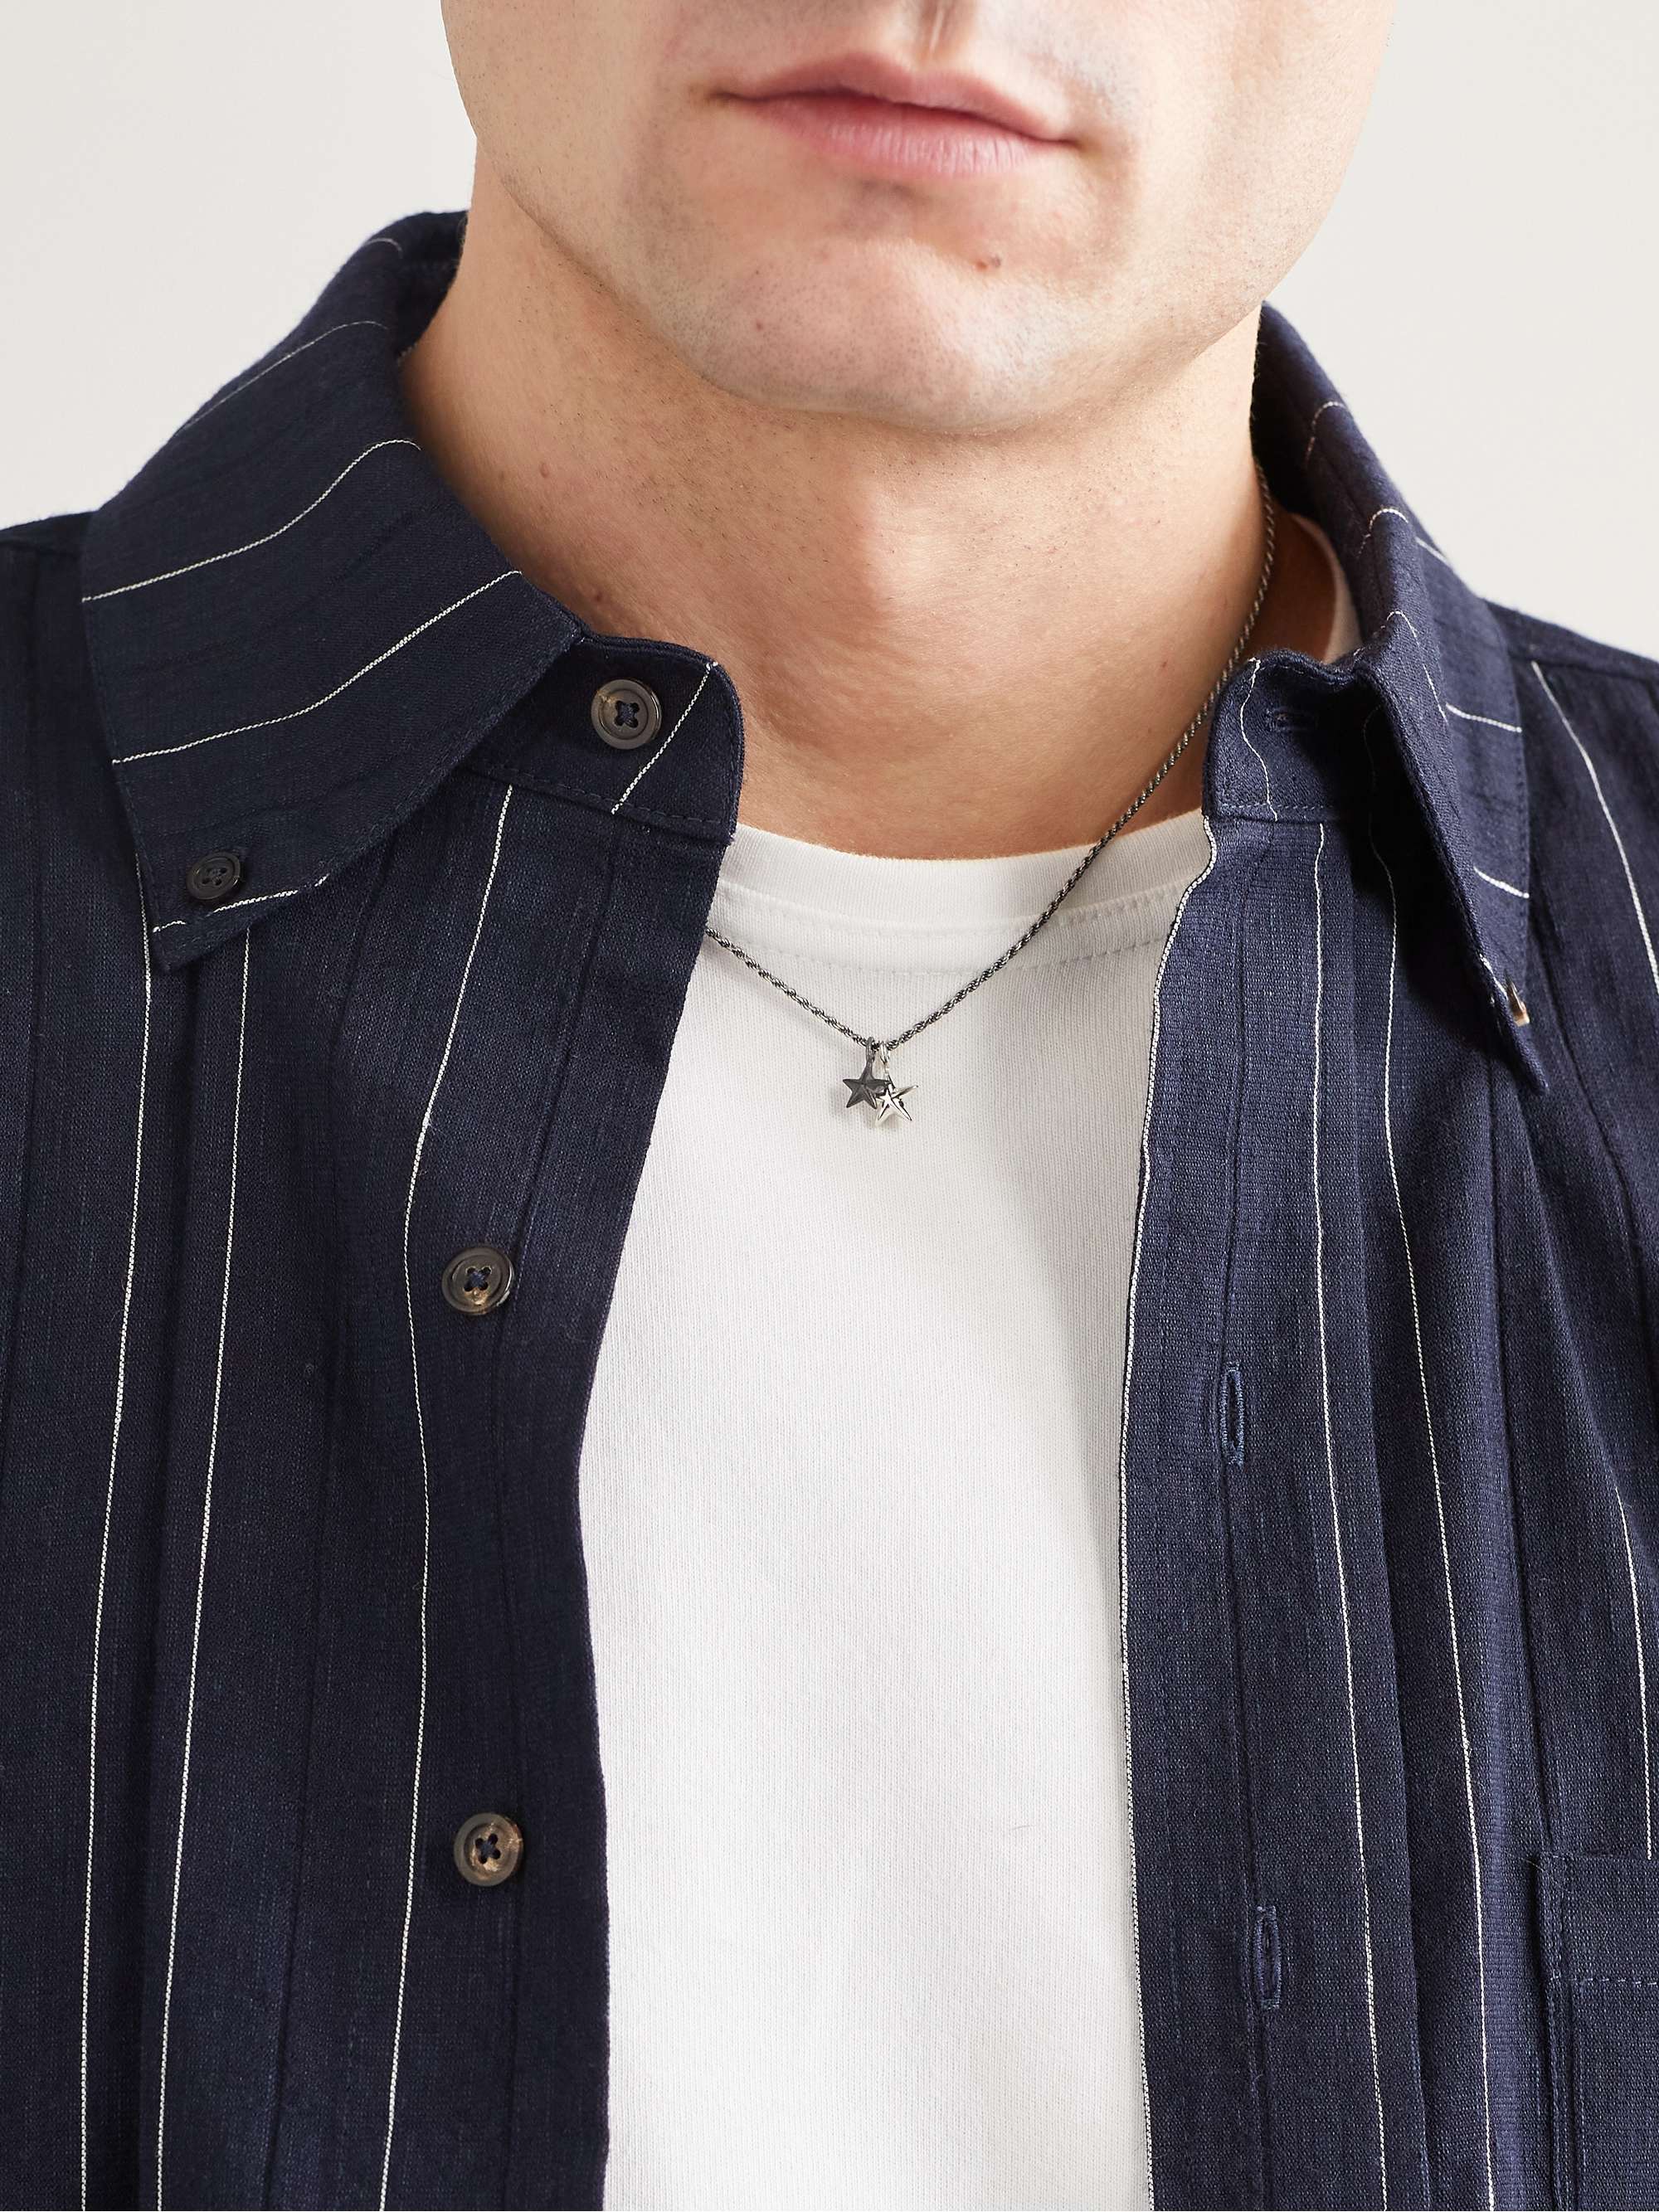 PAUL SMITH Silver- and Gunmetal-Tone Necklace | MR PORTER